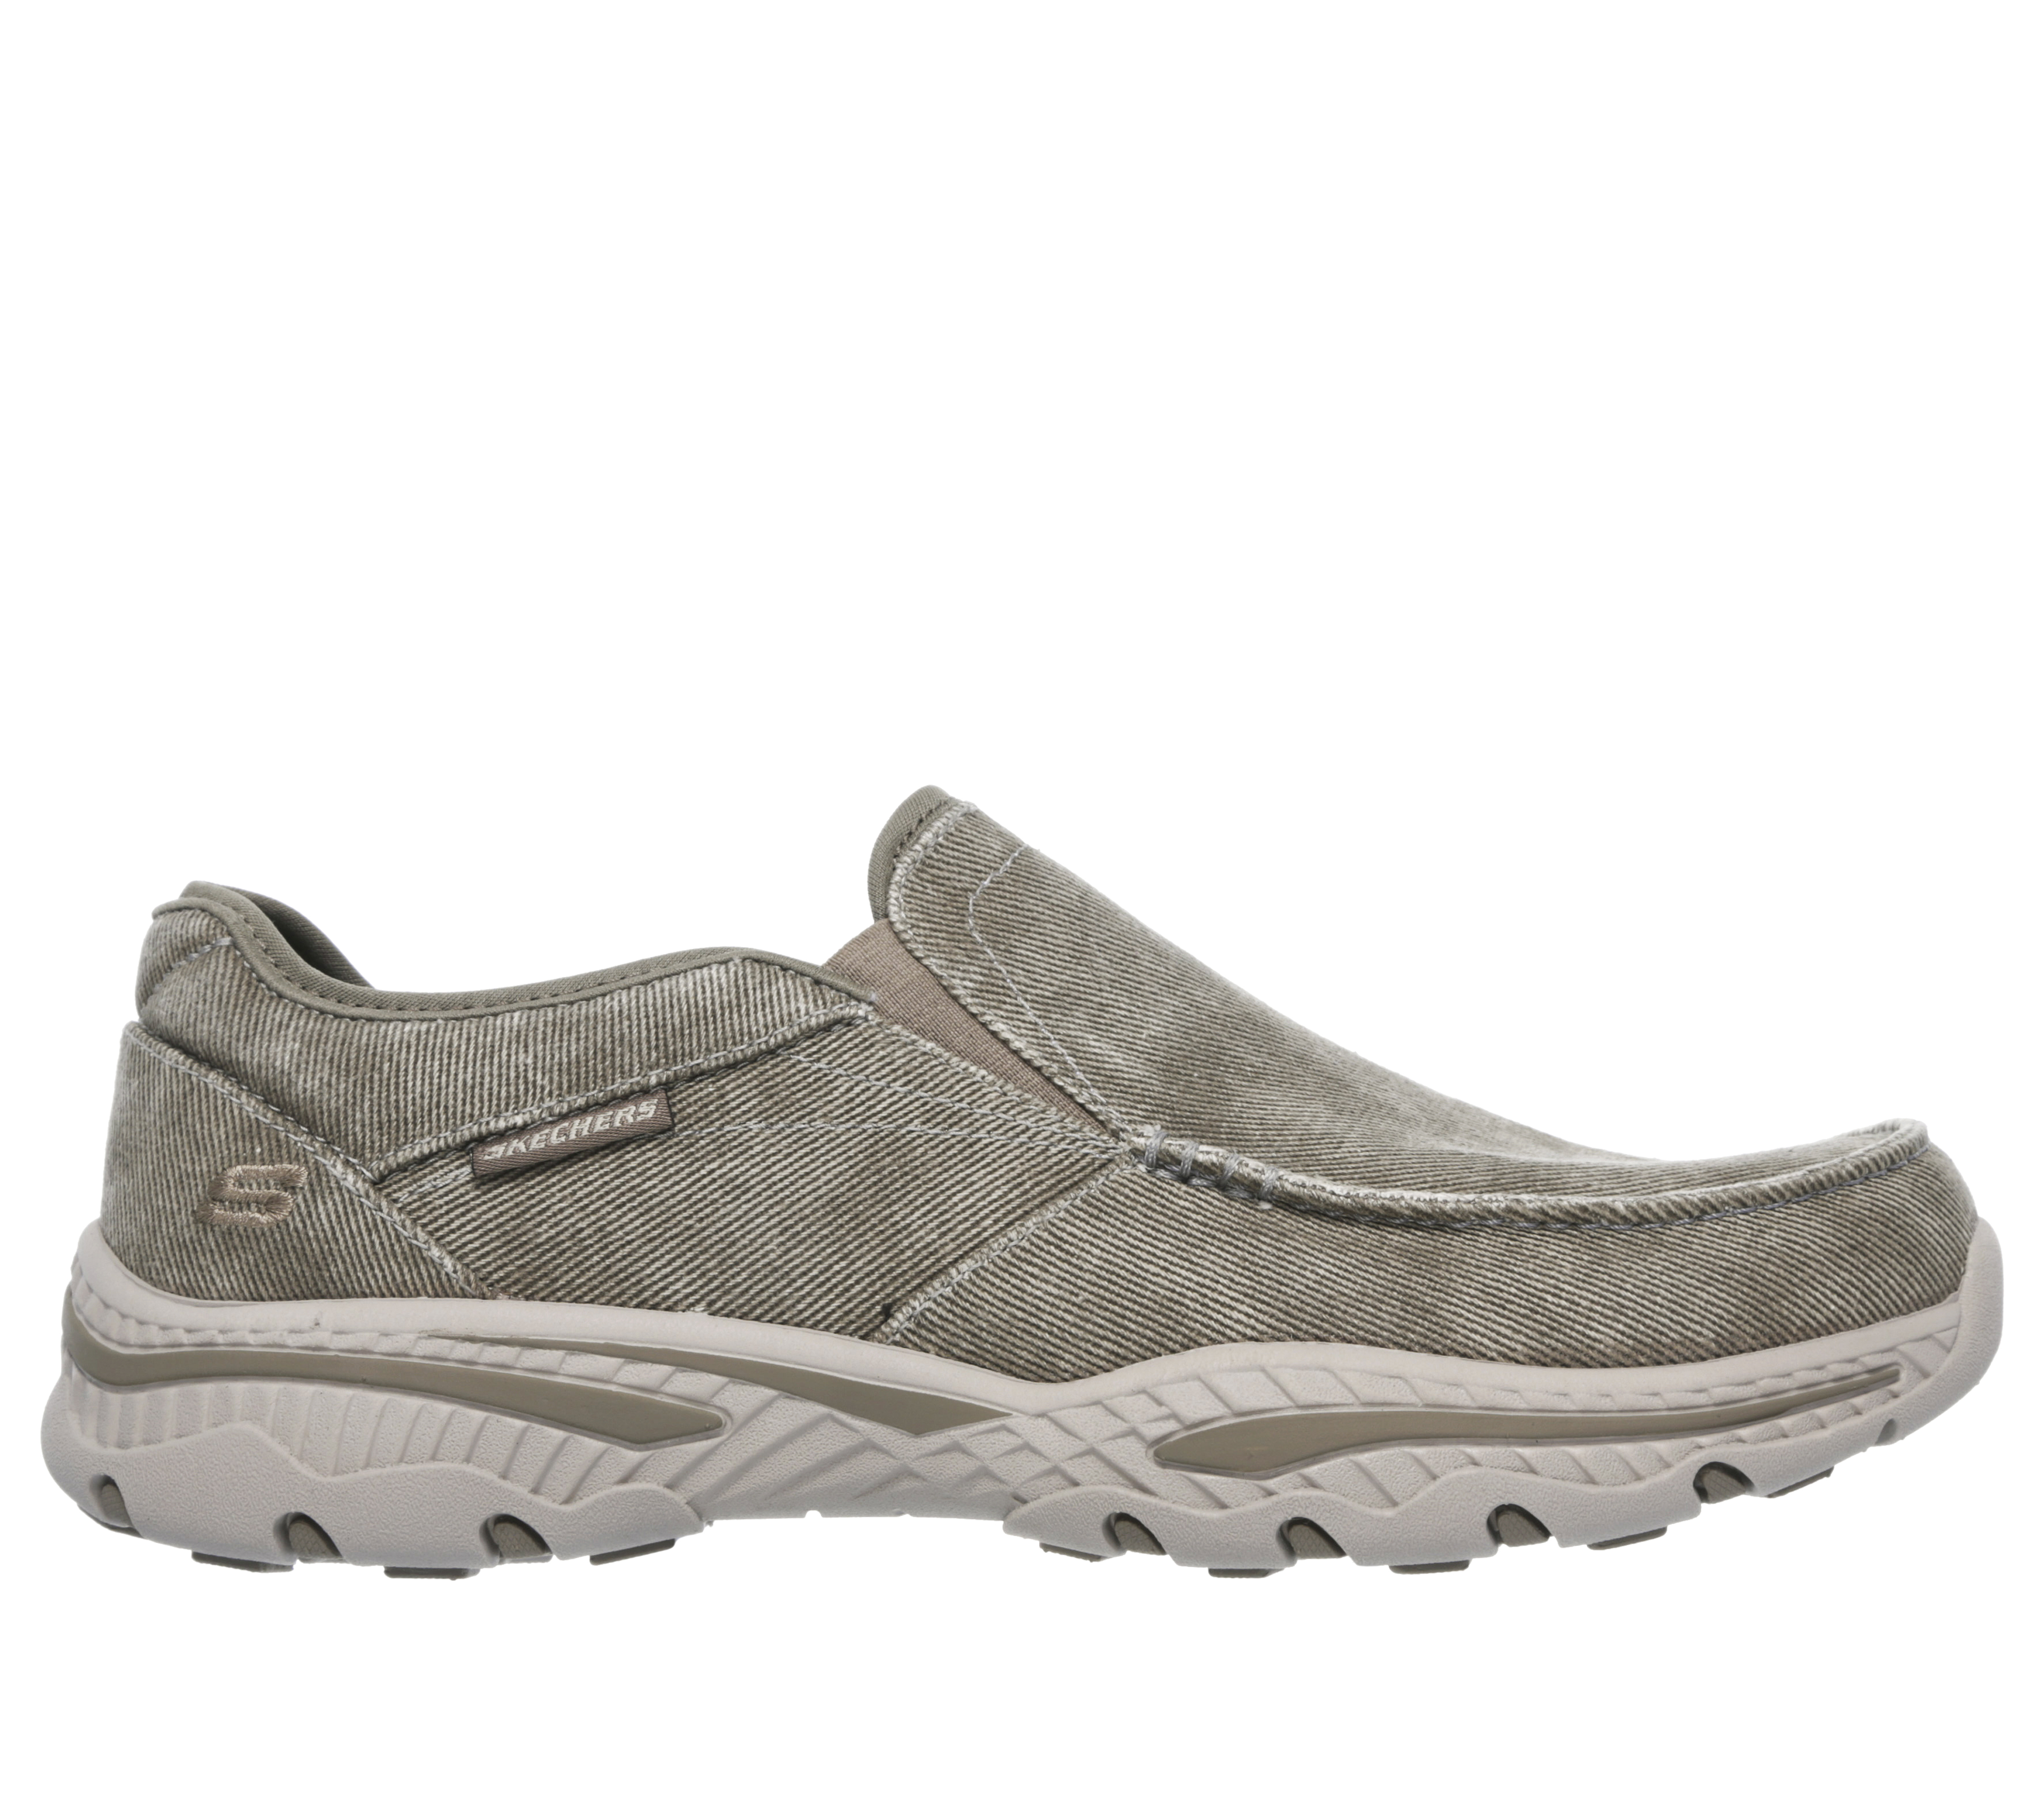 What is Skechers Relaxed Fit? - Shoe Effect